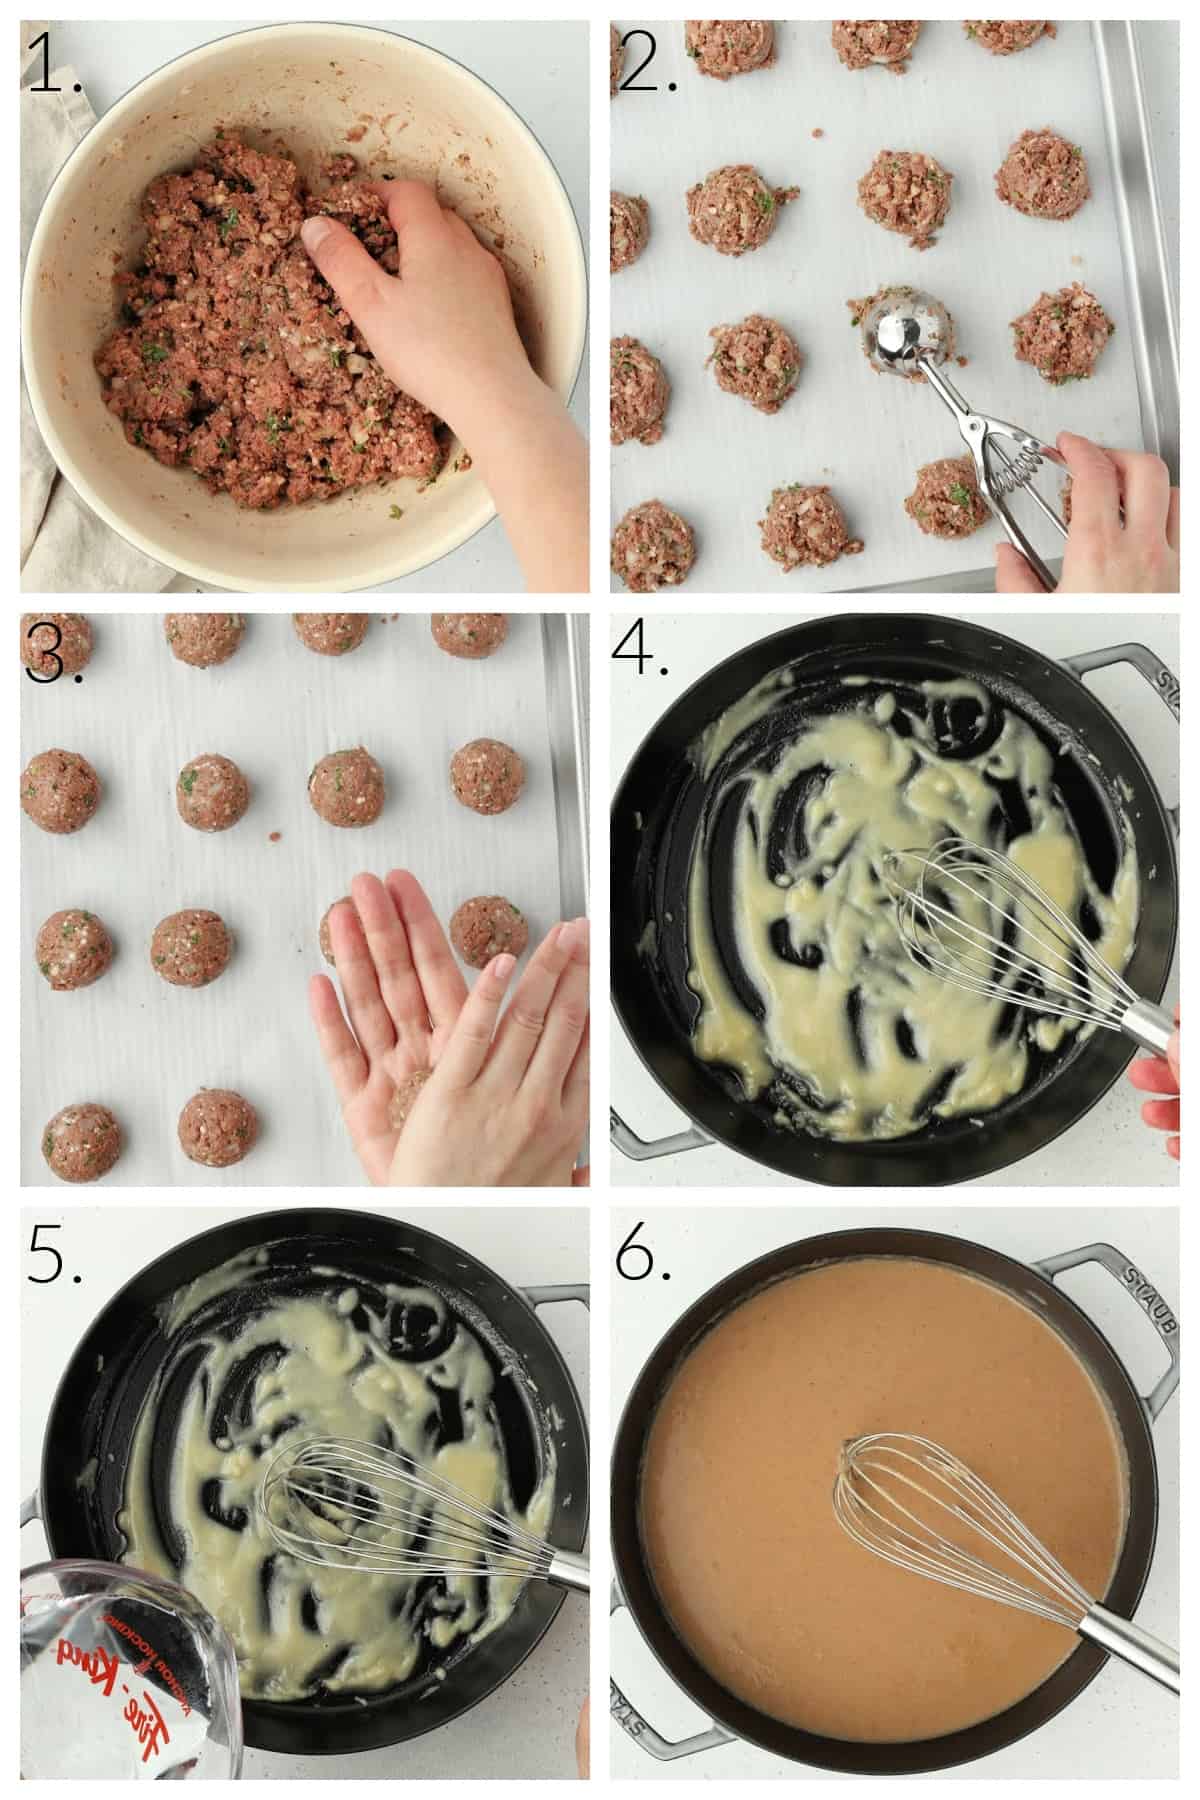 six process photos of forming the meatballs and making the sauce. 